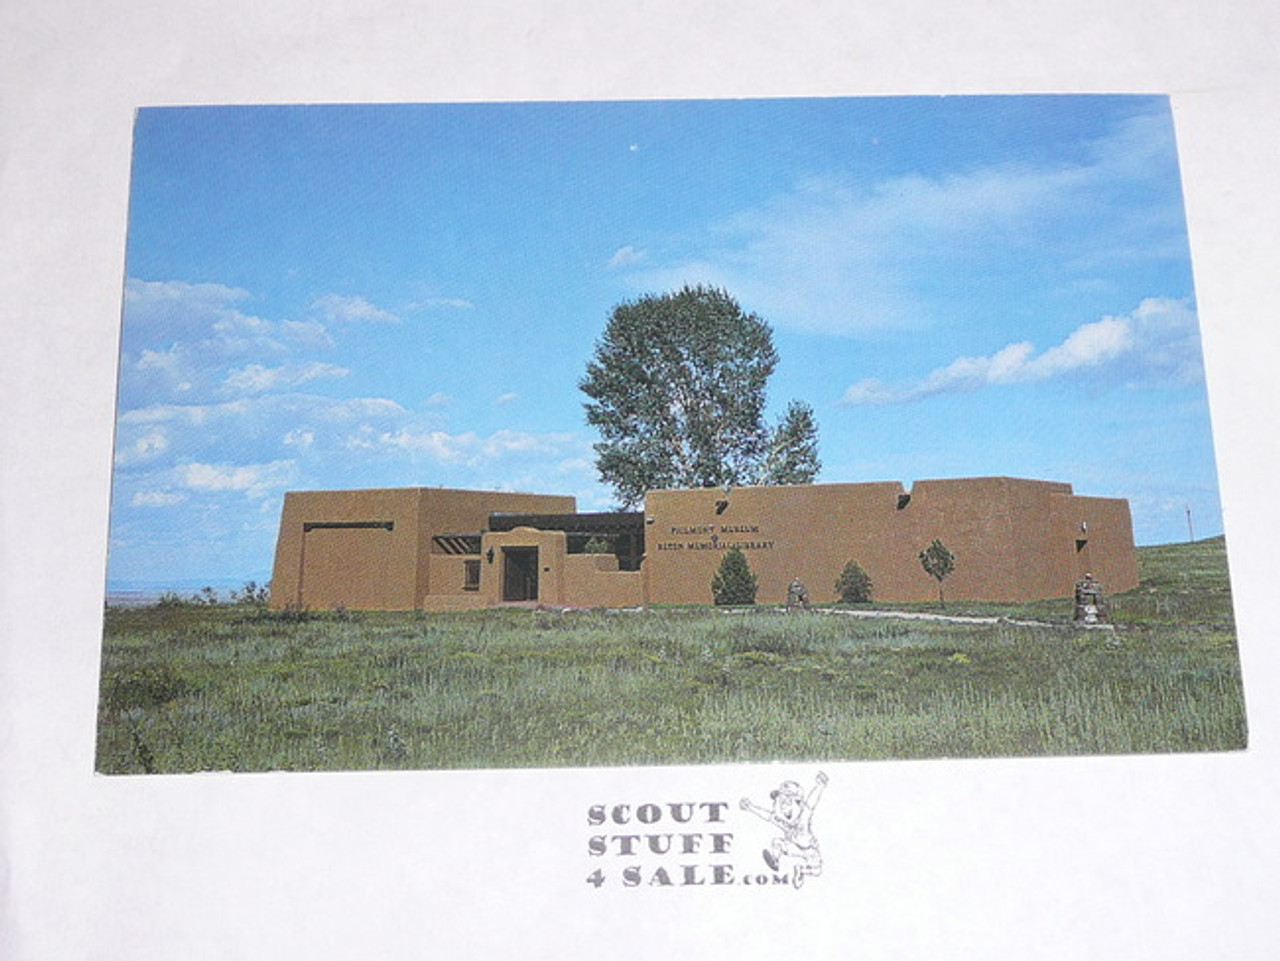 Philmont Scout Ranch Post card, Seton Museum with large tree behind, 1950's-80's